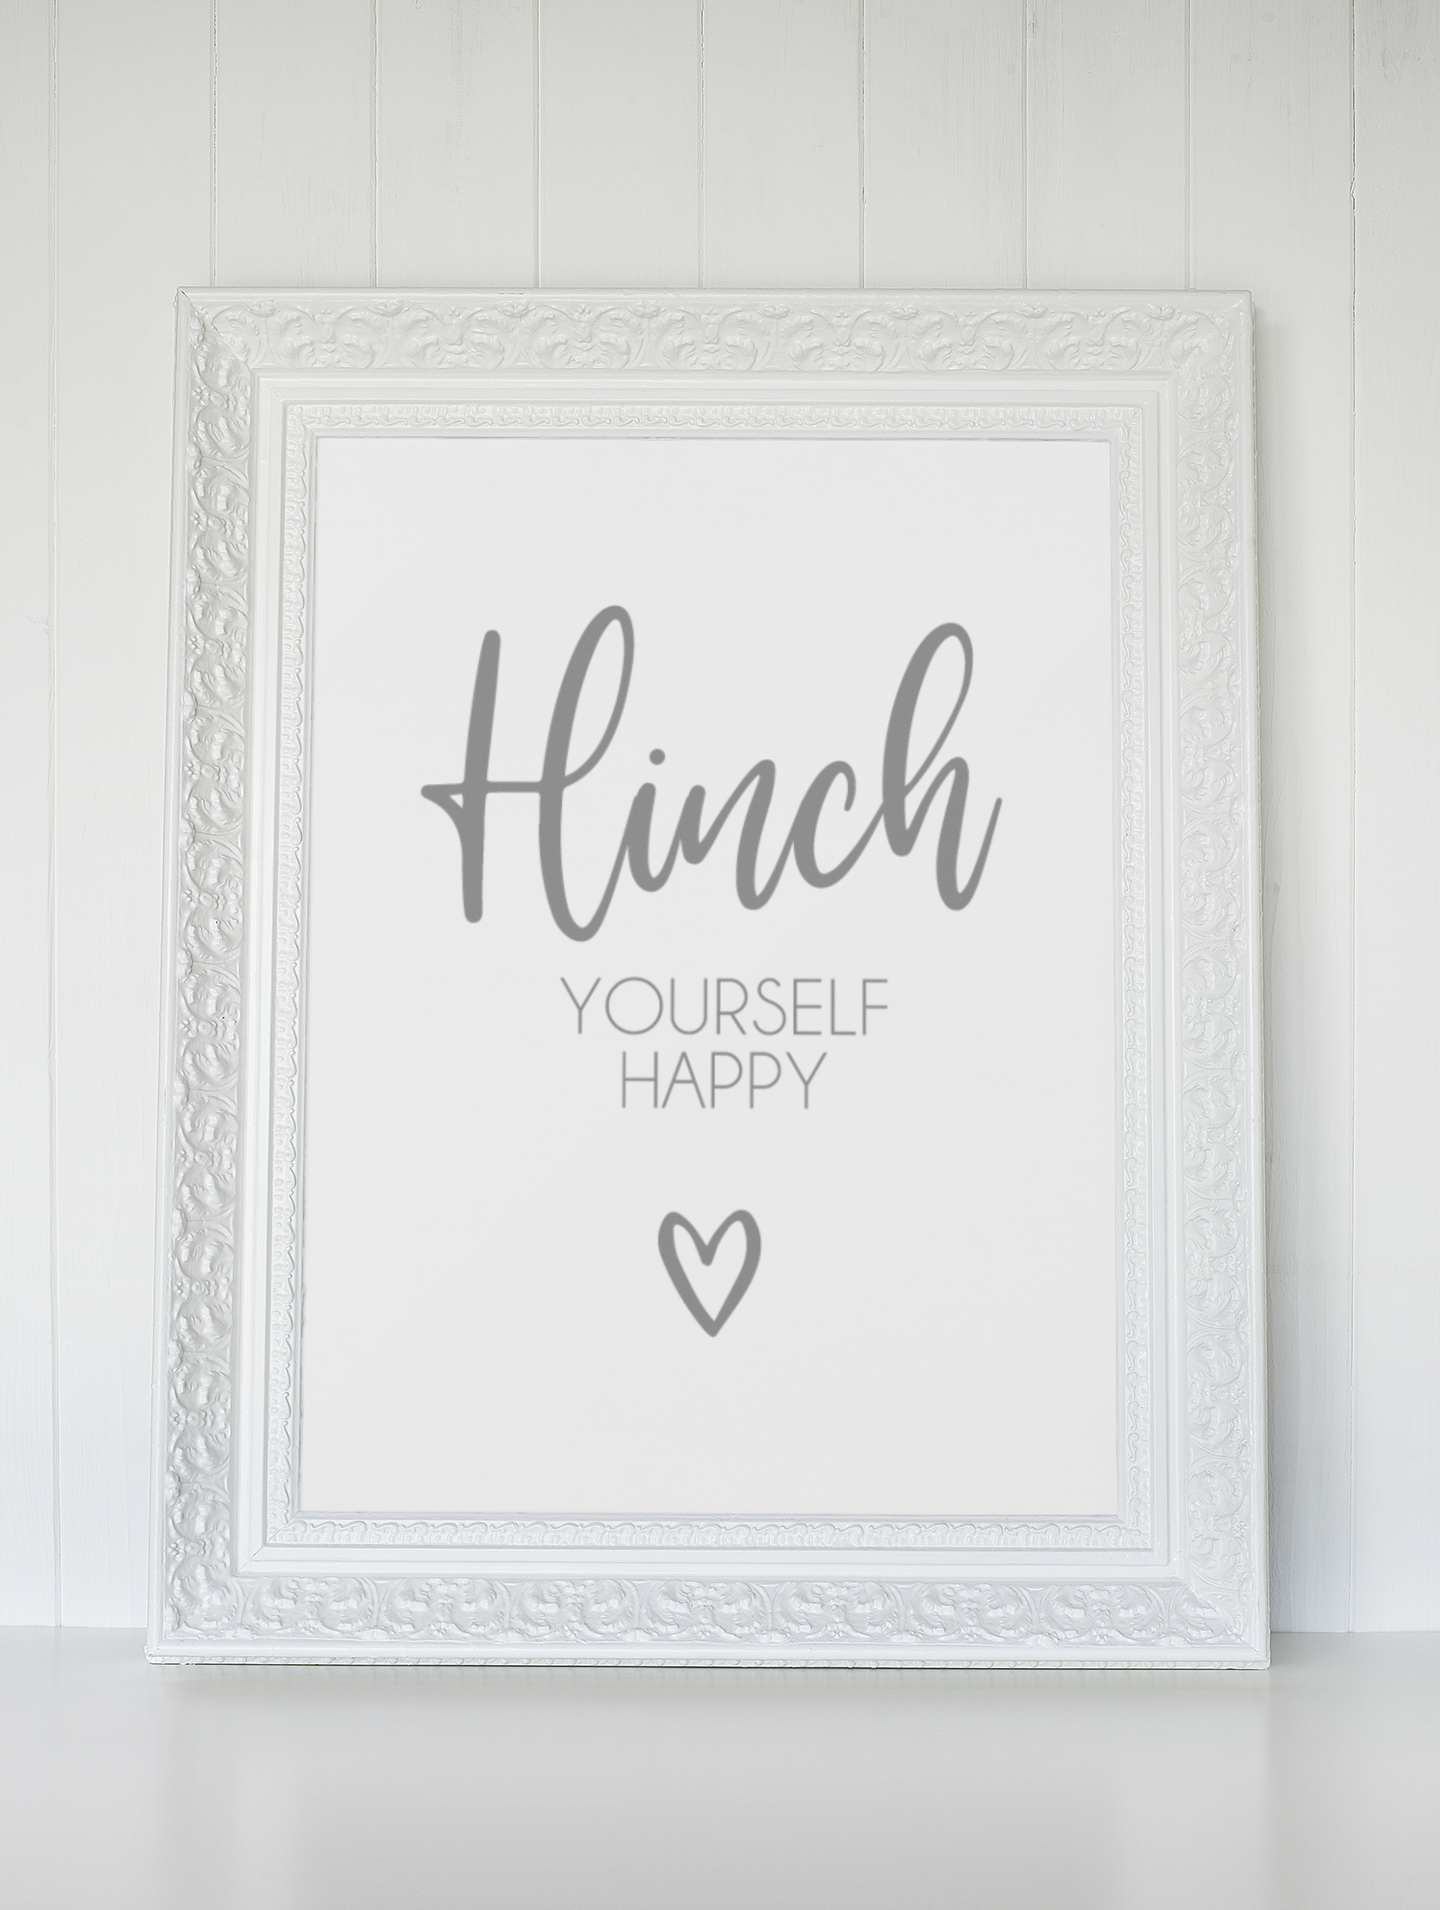 Hinch Yourself Happy Heart Cleaning Home Wall Decor Print